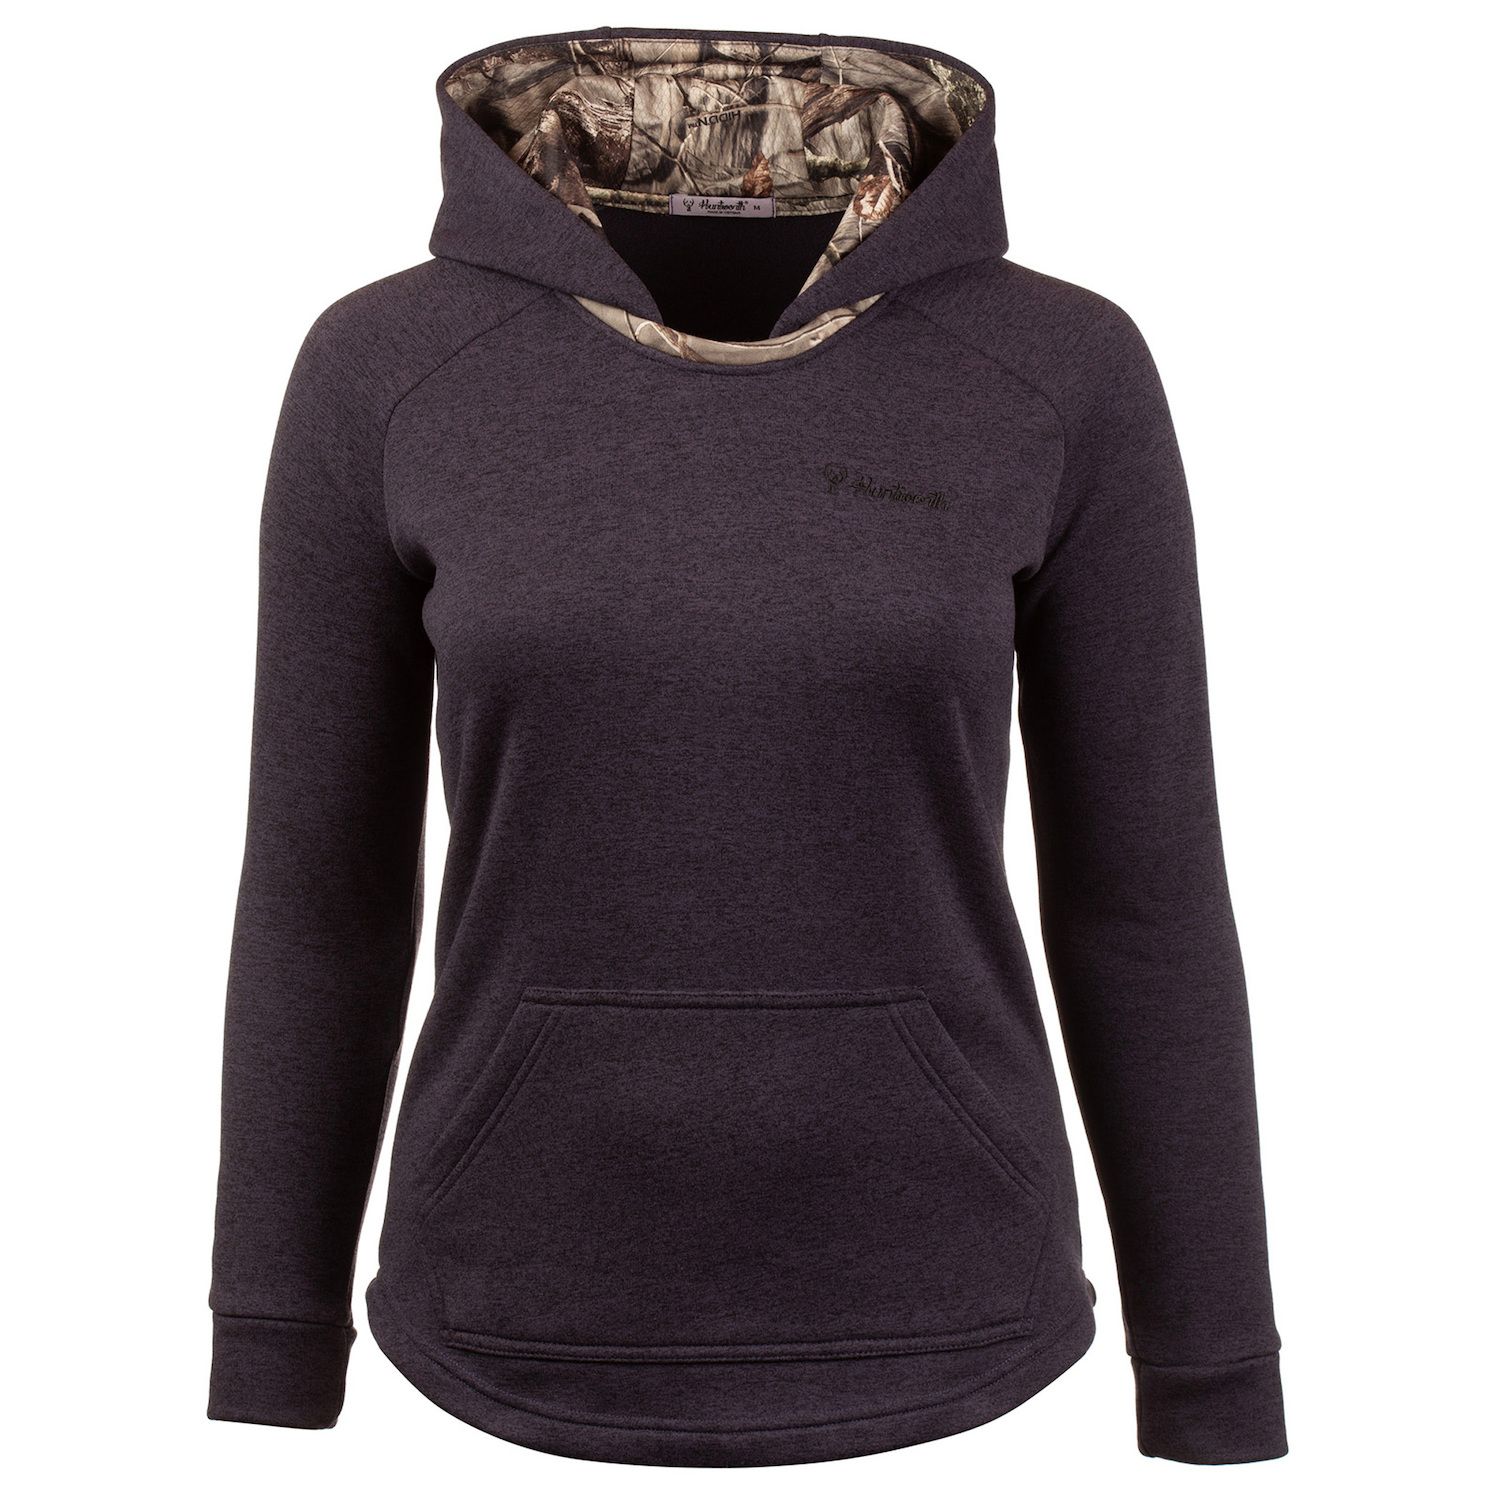 Image for Huntworth Women's Knit Jersey Hoodie at Kohl's.